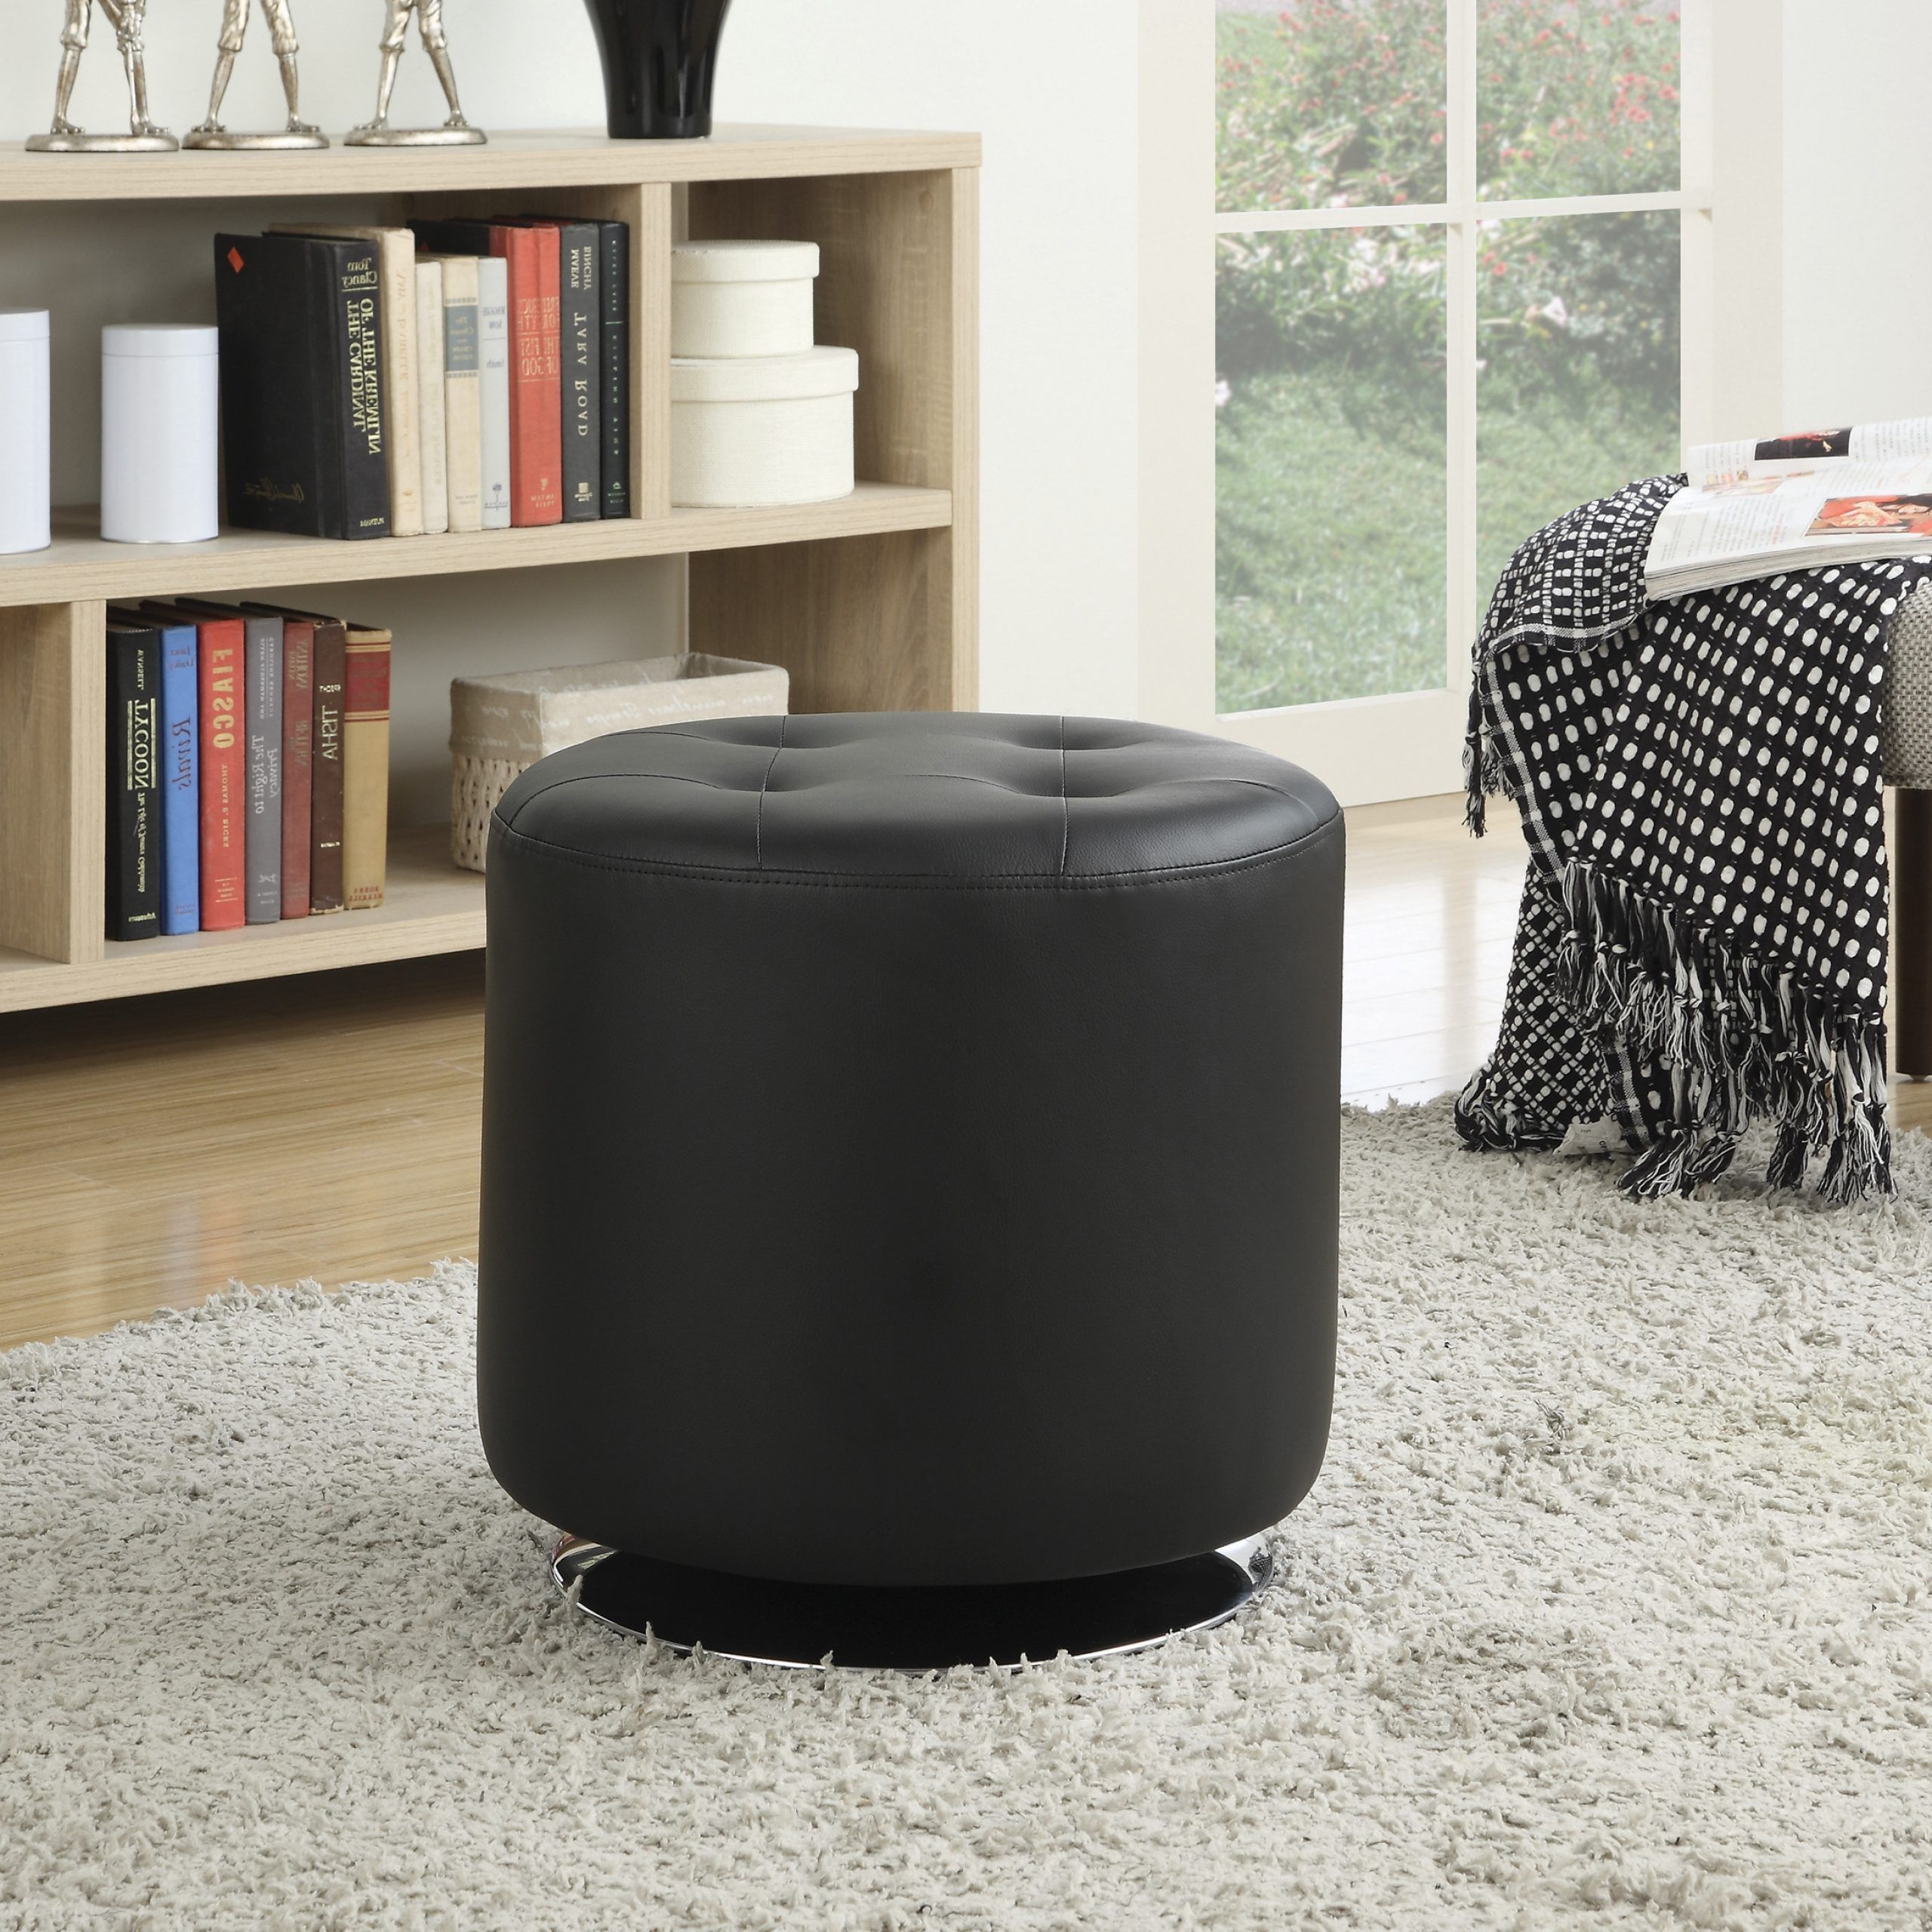 2018 Round Black Tasseled Ottomans Pertaining To Round Upholstered Ottoman Black – Coaster Fine Furniture (View 1 of 10)